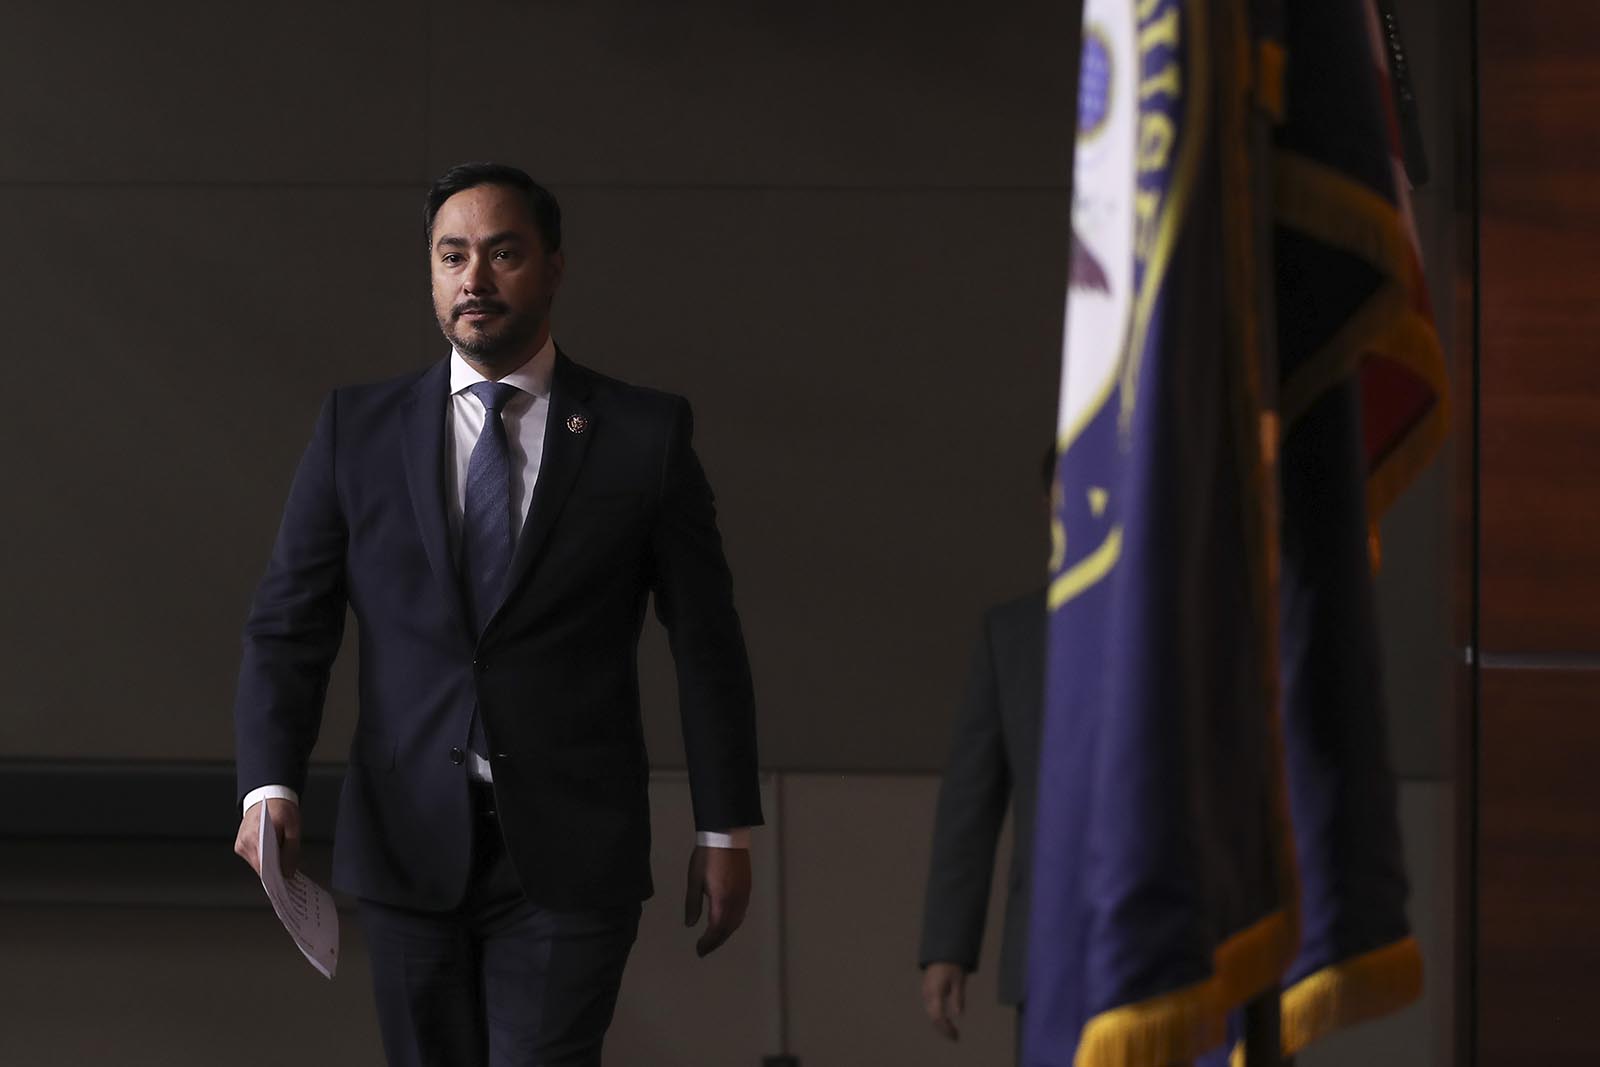 Congressional Hispanic Caucus chairman Rep. Joaquin Castro arrives for a news conference to discuss the Supreme Court case involving Deferred Action for Childhood Arrivals at the U.S. Capitol on November 12, 2019 in Washington.